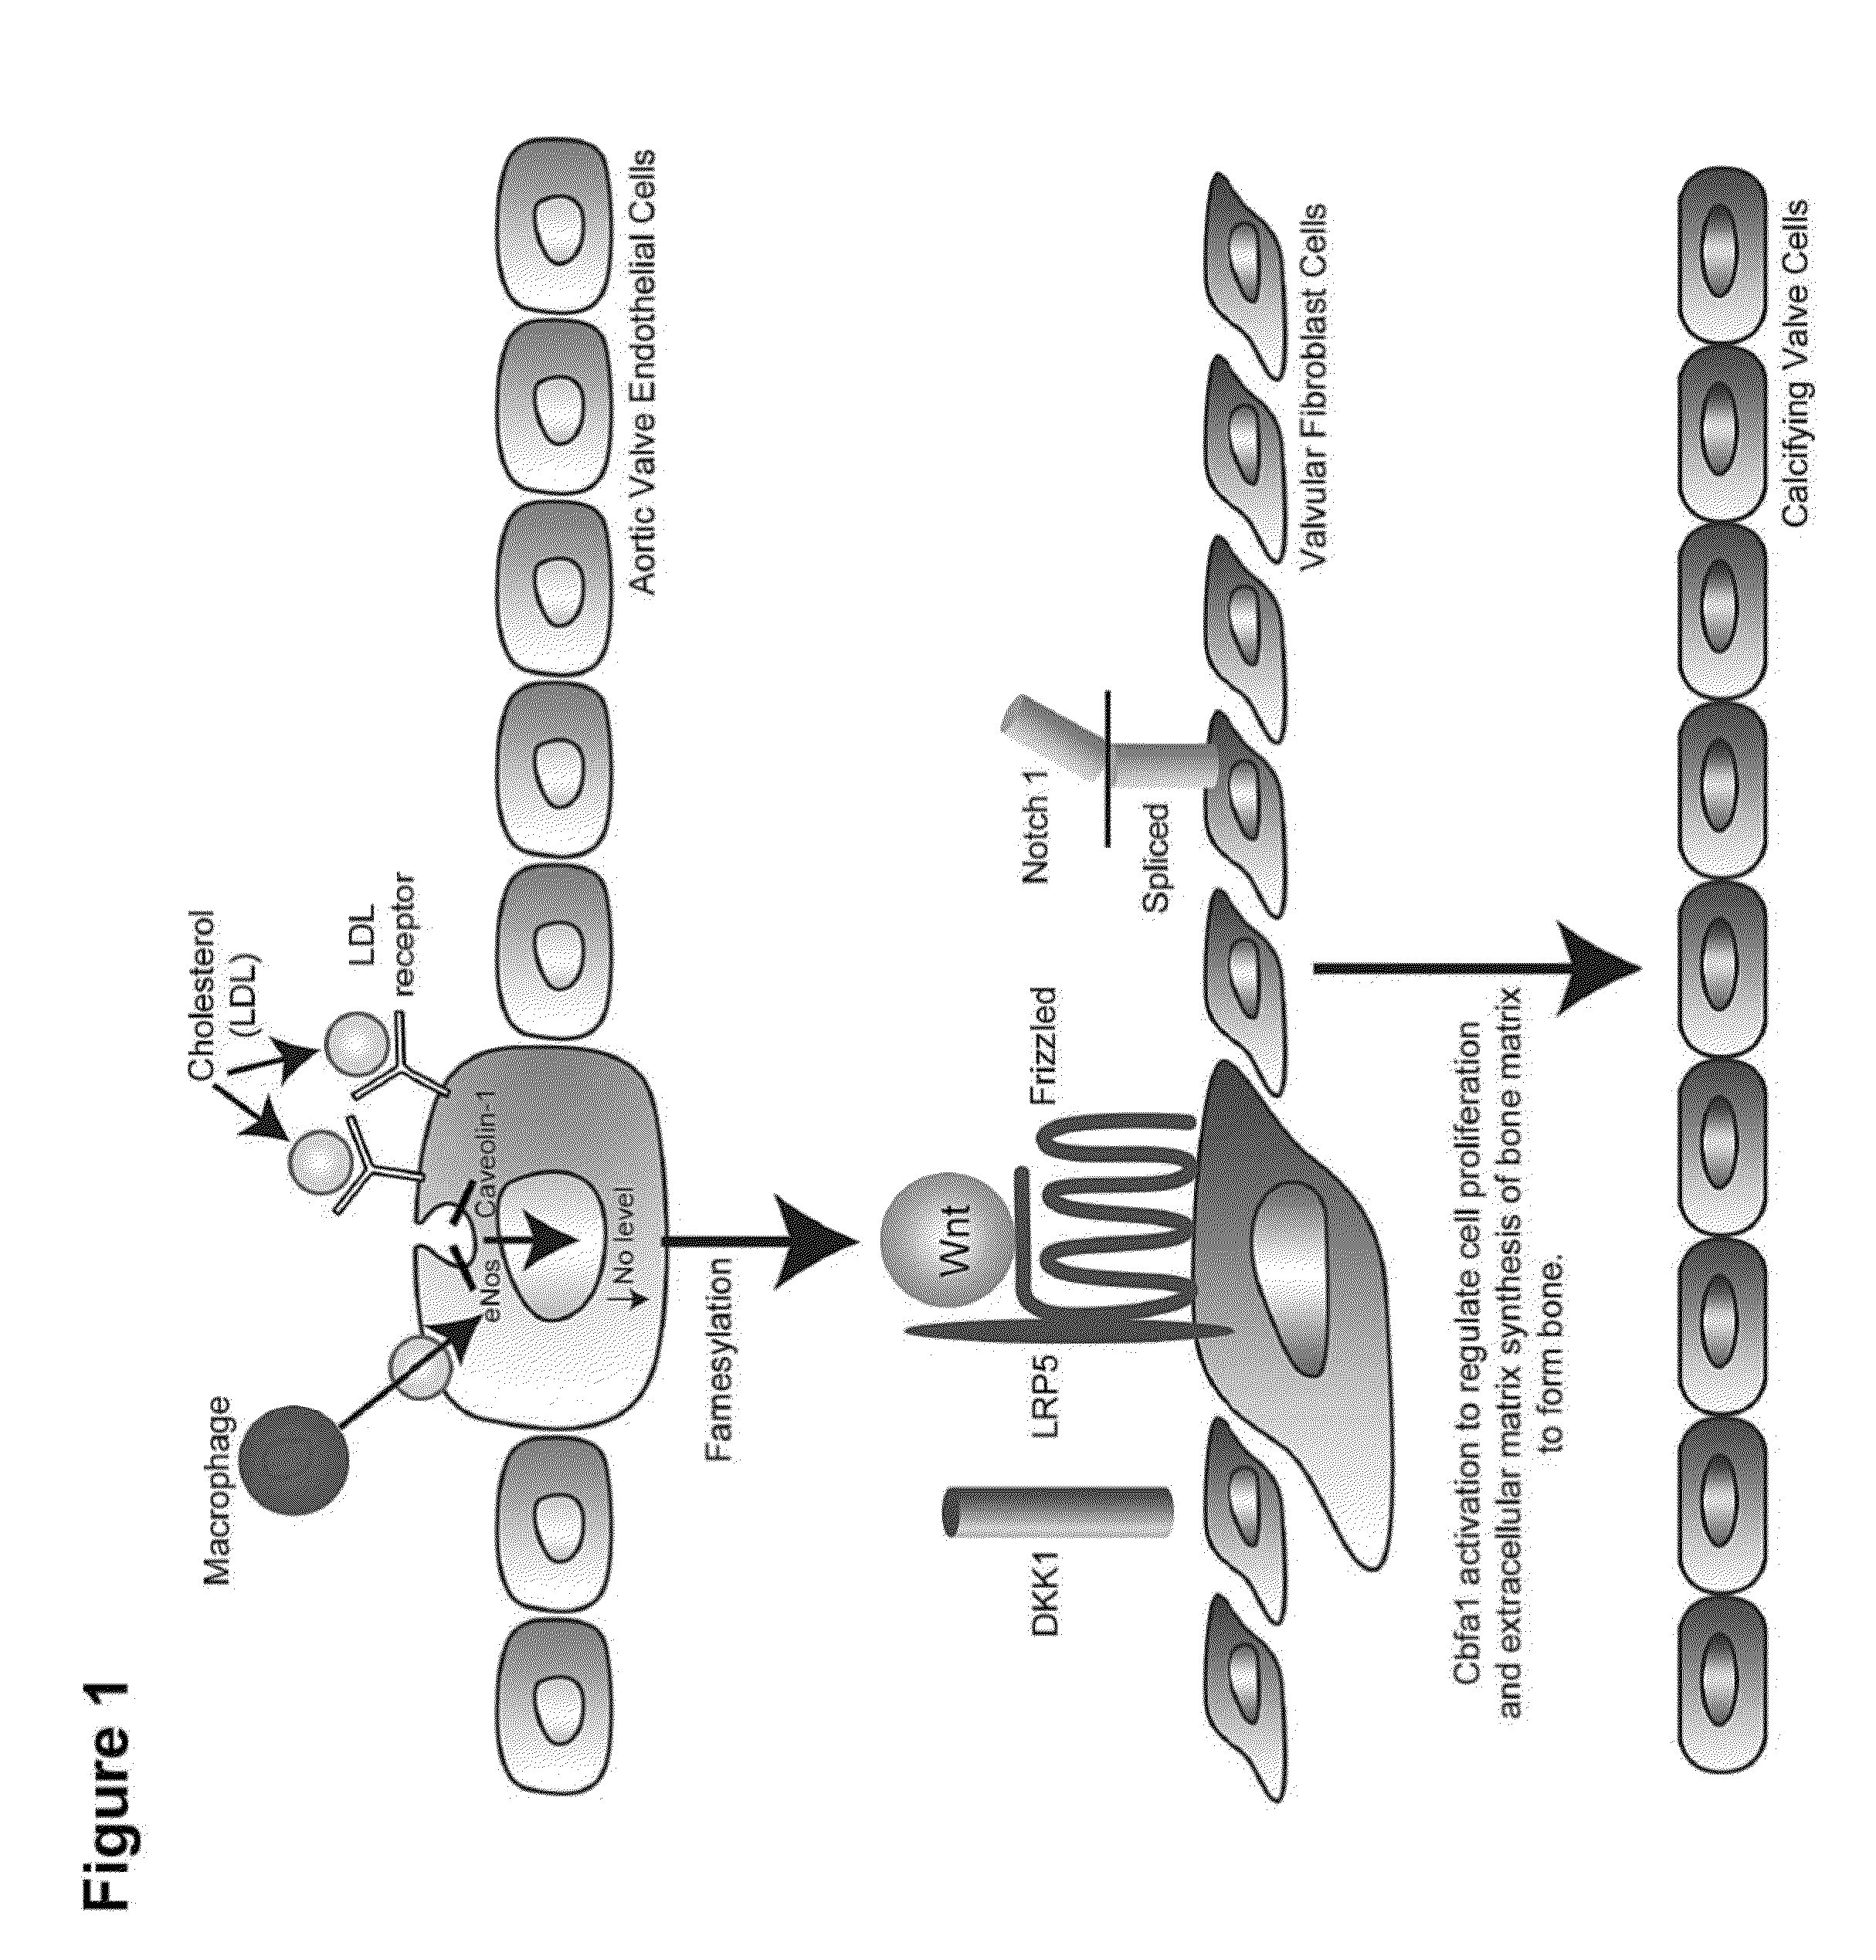 Devices and methods for inhibiting stenosis, obstruction, or calcification of a native heart valve, stented heart valve or bioprosthesis